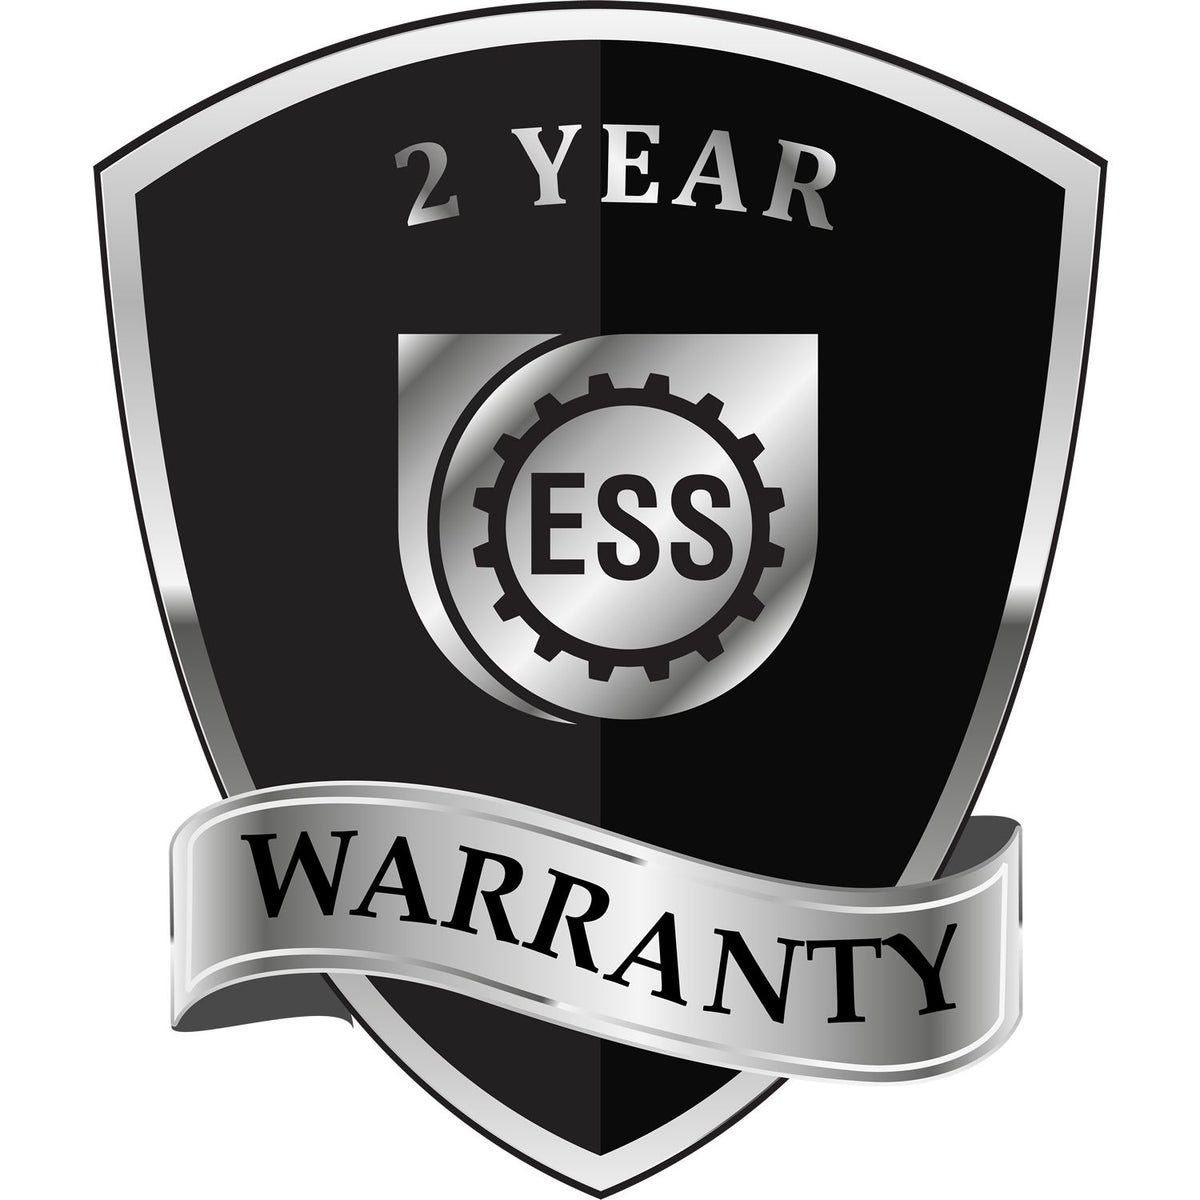 A badge or emblem showing a warranty icon for the Heavy Duty Cast Iron Montana Engineer Seal Embosser